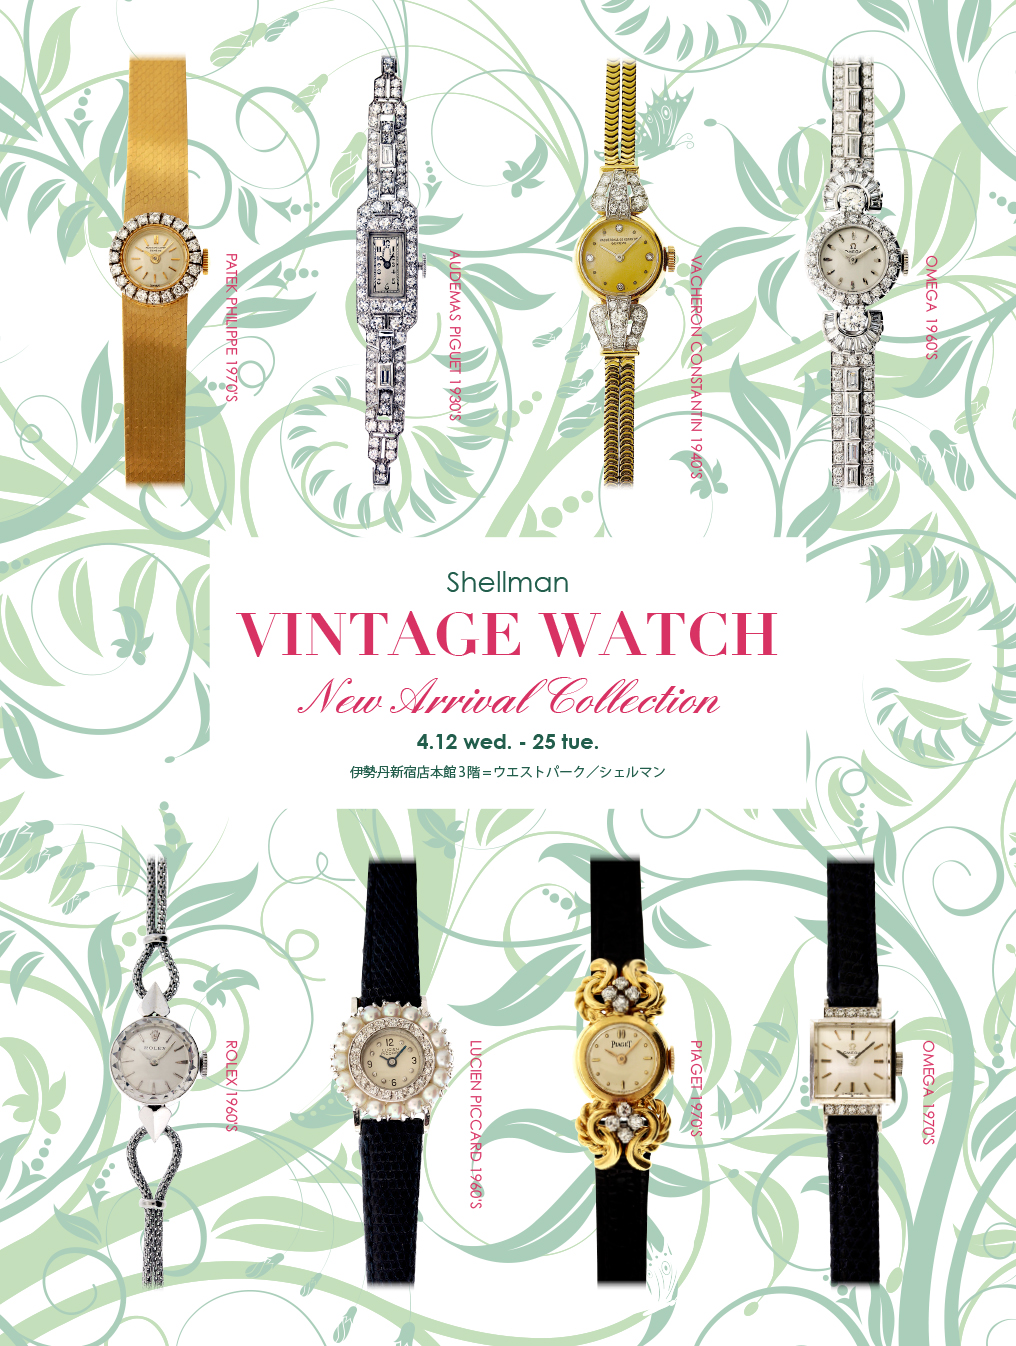 VINTAGE WATCH New Arrival Collection